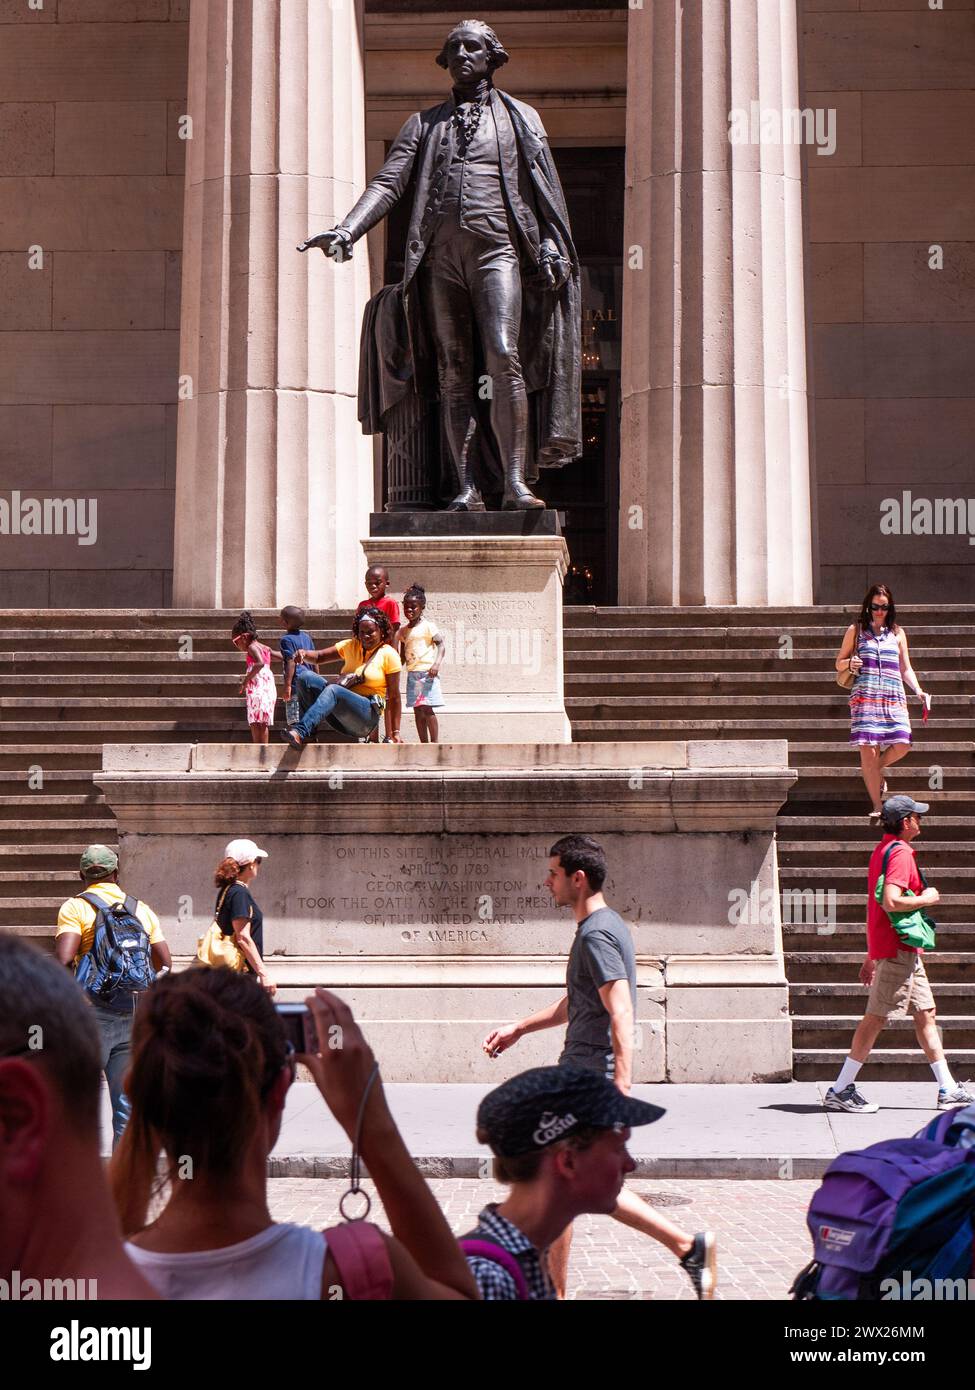 George Washington, 1882, by John Quincy Adams Ward, in front of Federal Hall National Memorial, New York City, New York, United States of America, Stock Photo